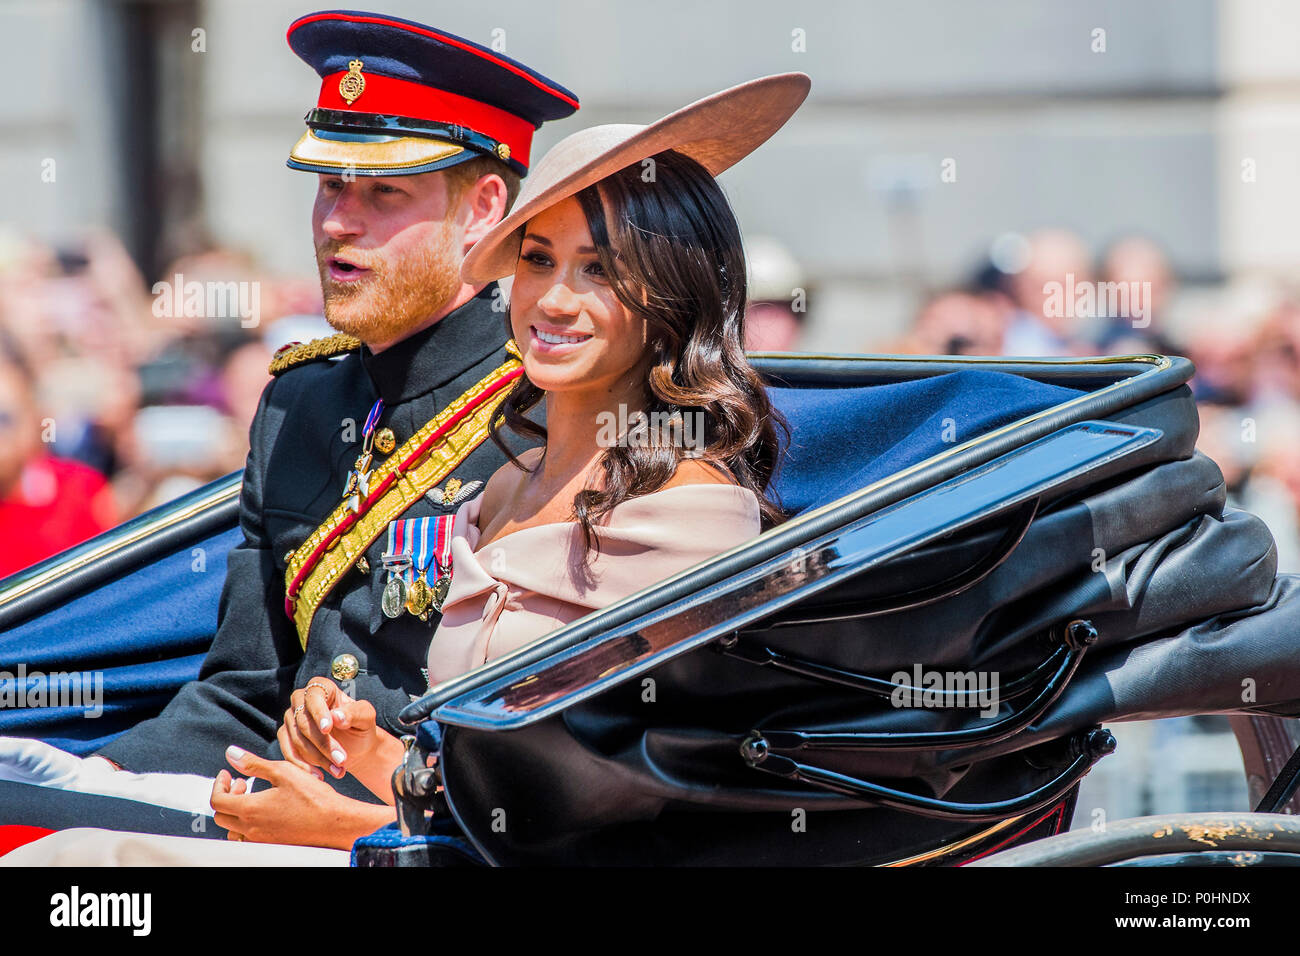 London, UK, 9 June 2018. Prince Harry and Meghan, The Duke and Duchess of Sussex return to Buckingham Palace - The Queen’s Birthday Parade, more popularly known as Trooping the Colour. The Coldstream Guards Troop Their Colour., Credit: Guy Bell/Alamy Live News Stock Photo